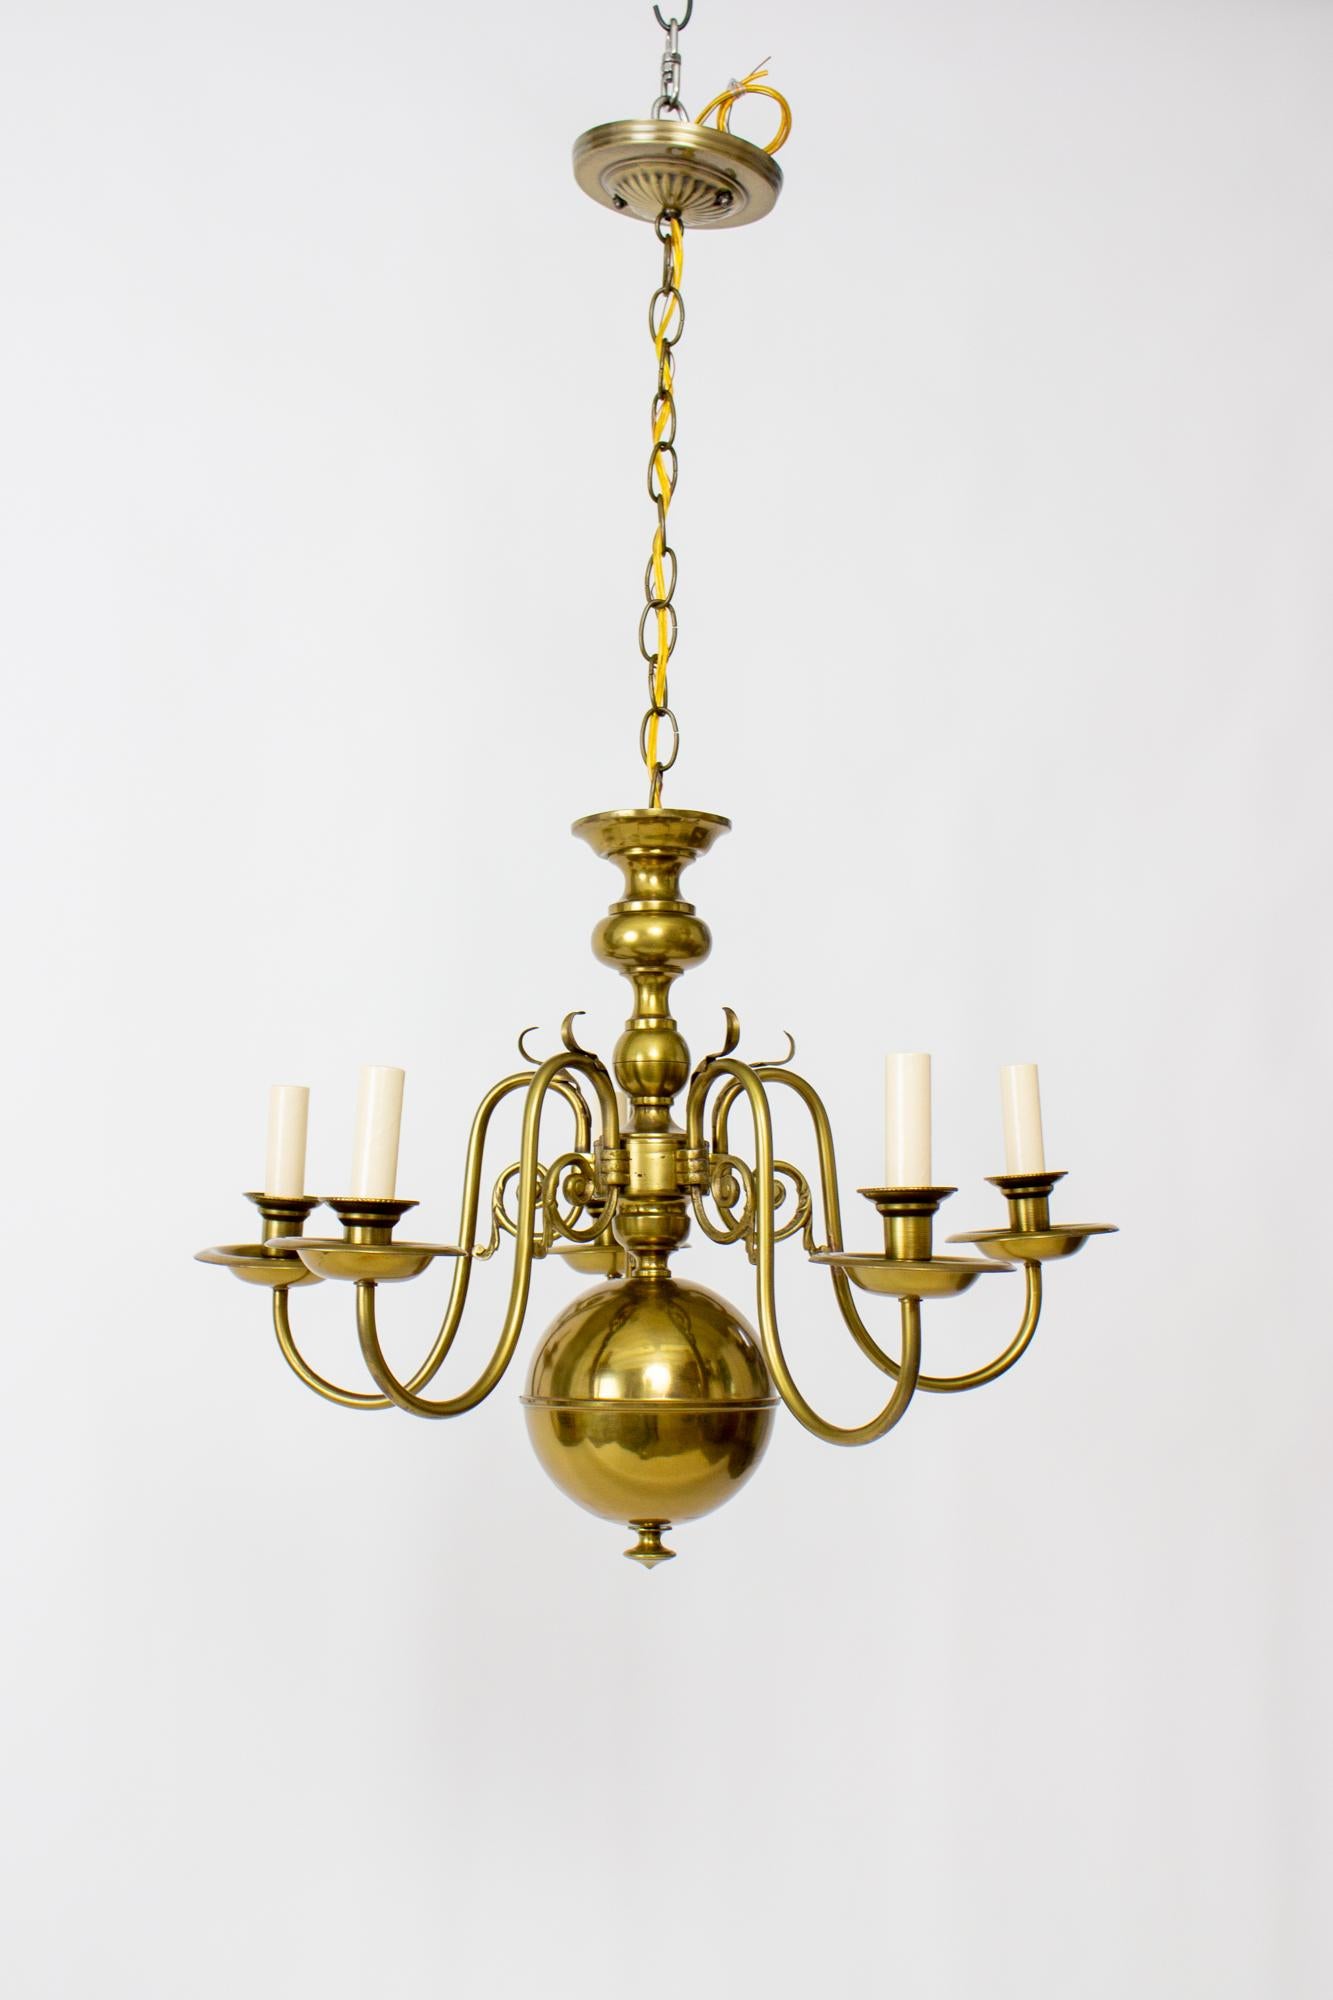 Mid-20th Century dutch colonial style chandelier. All brass with Five arms. Large brass ball at the bottom, with five delicate upsweeping arms. A leafy tuft adorns the uppermost curve of each arm. Center stem is made of brass elements. Includes